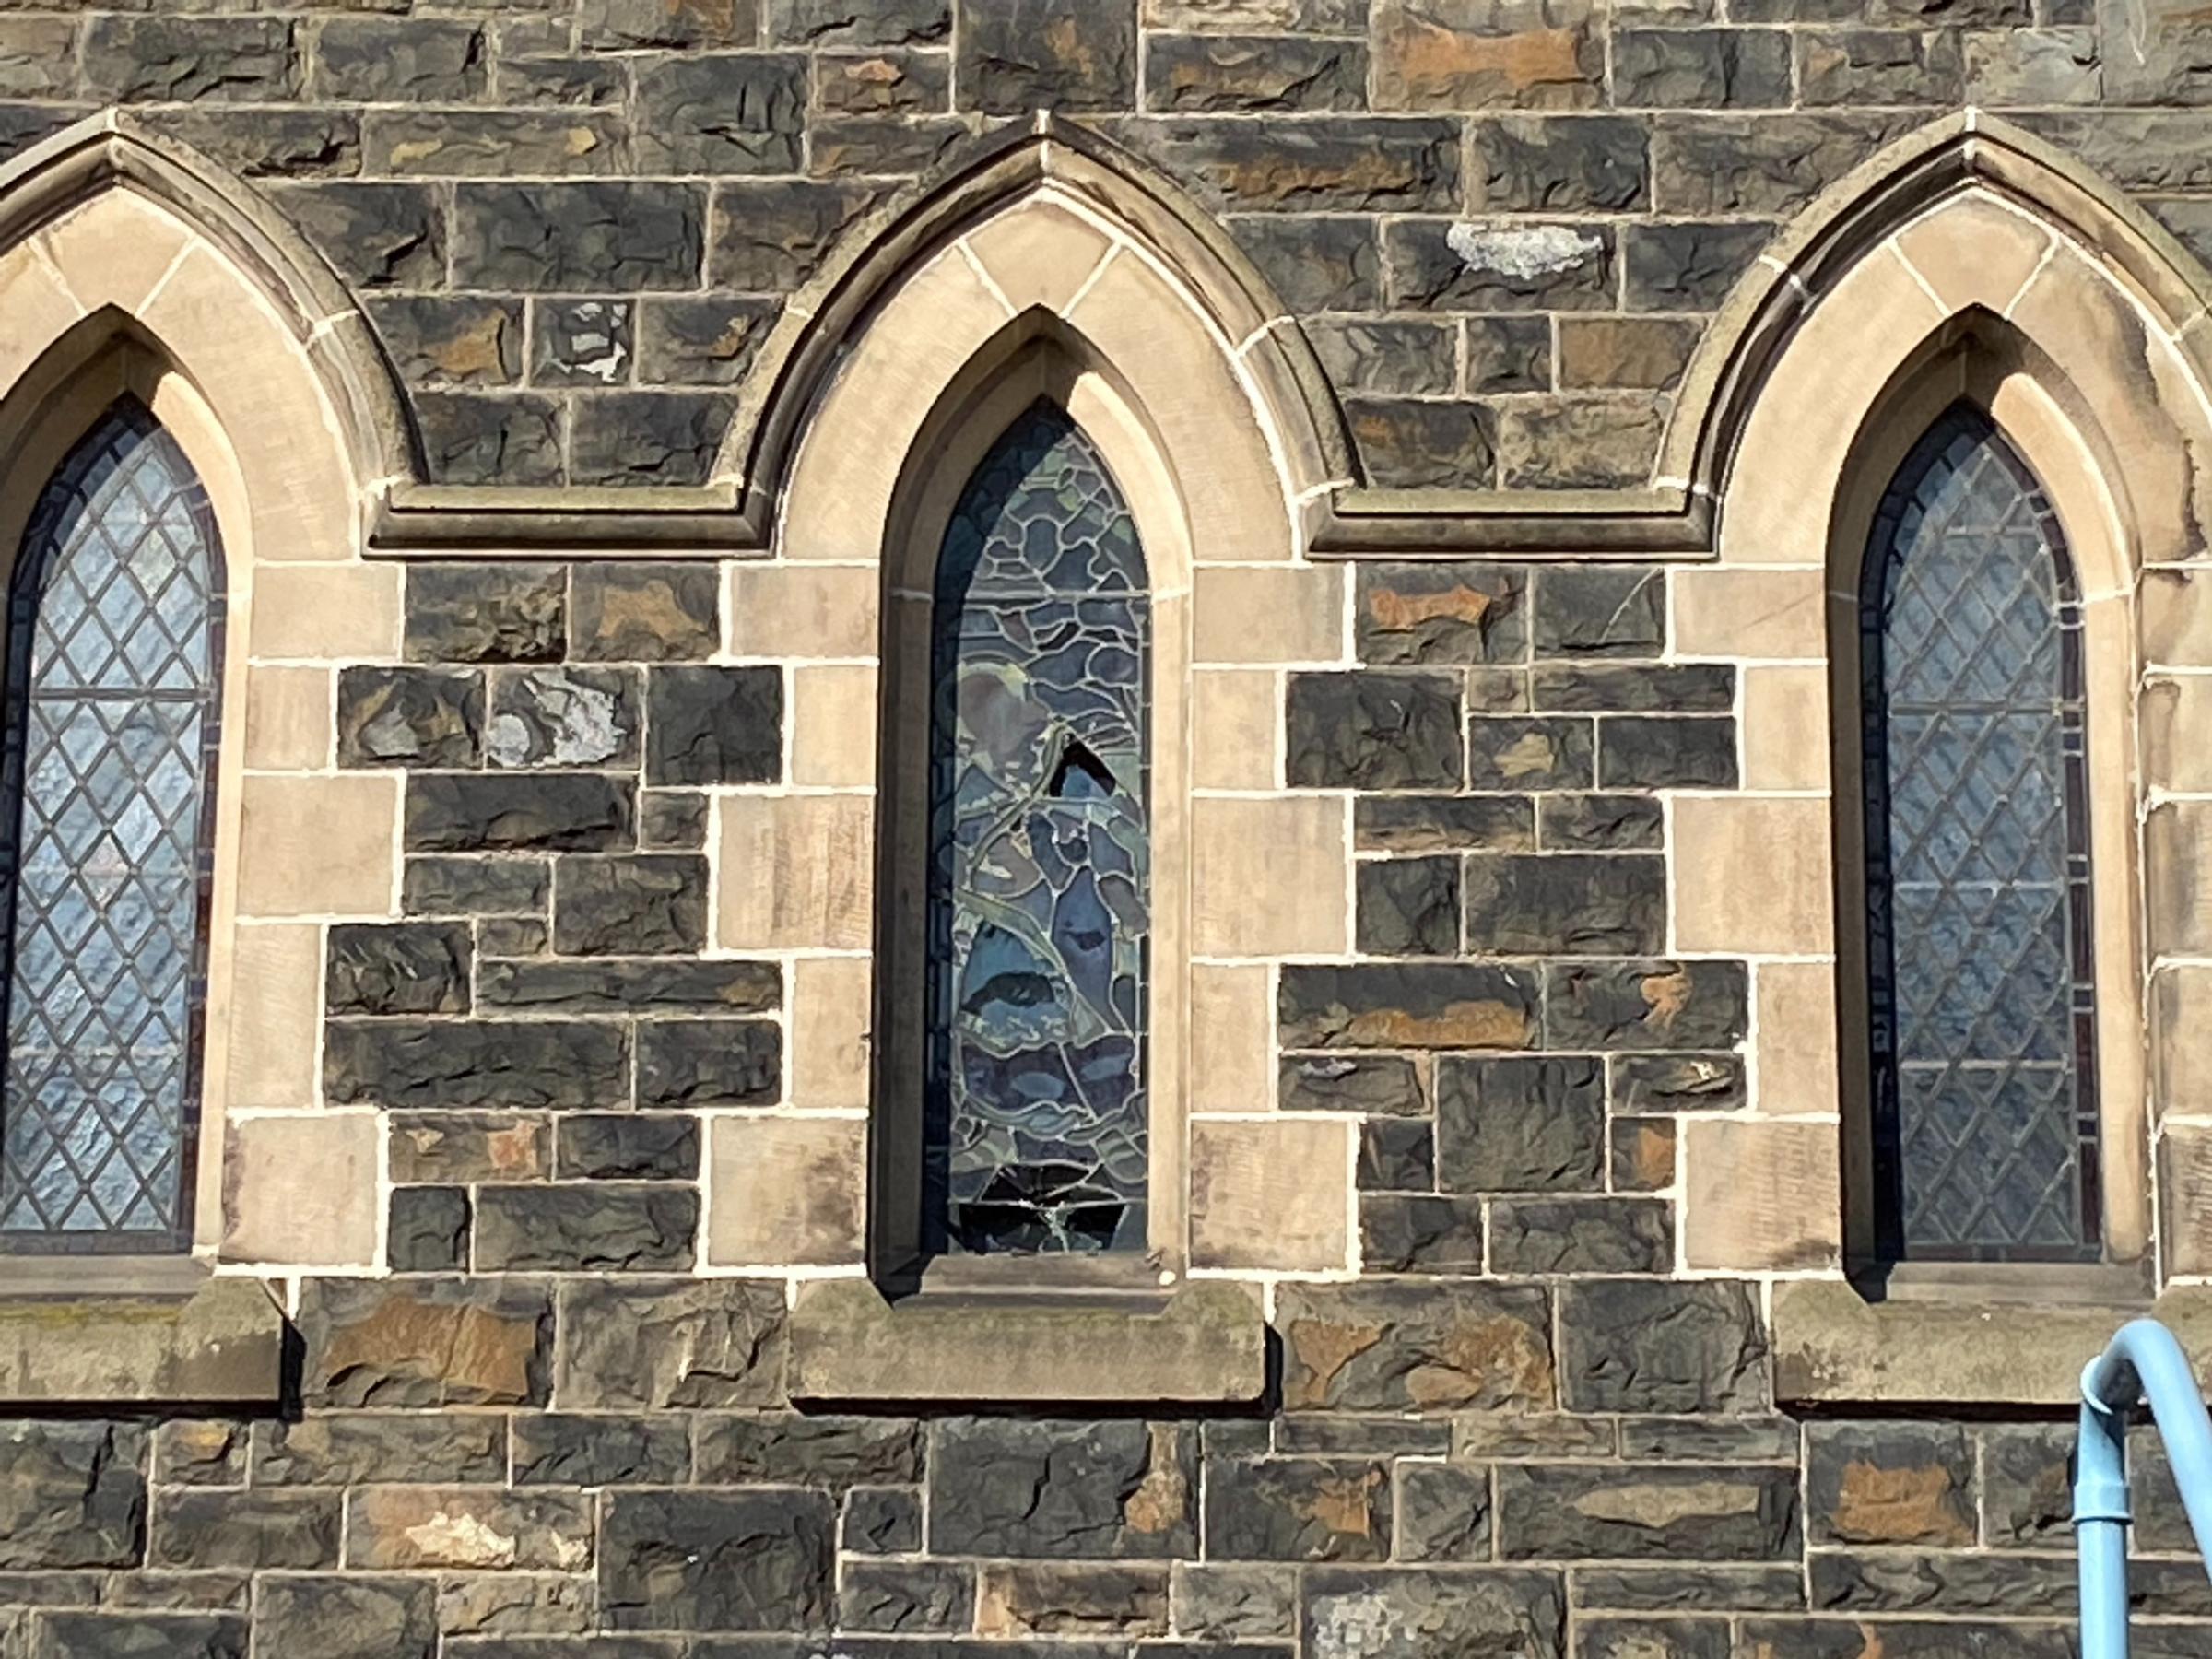 A window at Crescent Chapel, Newtown was smashed overnight on April 21 and 22, police say